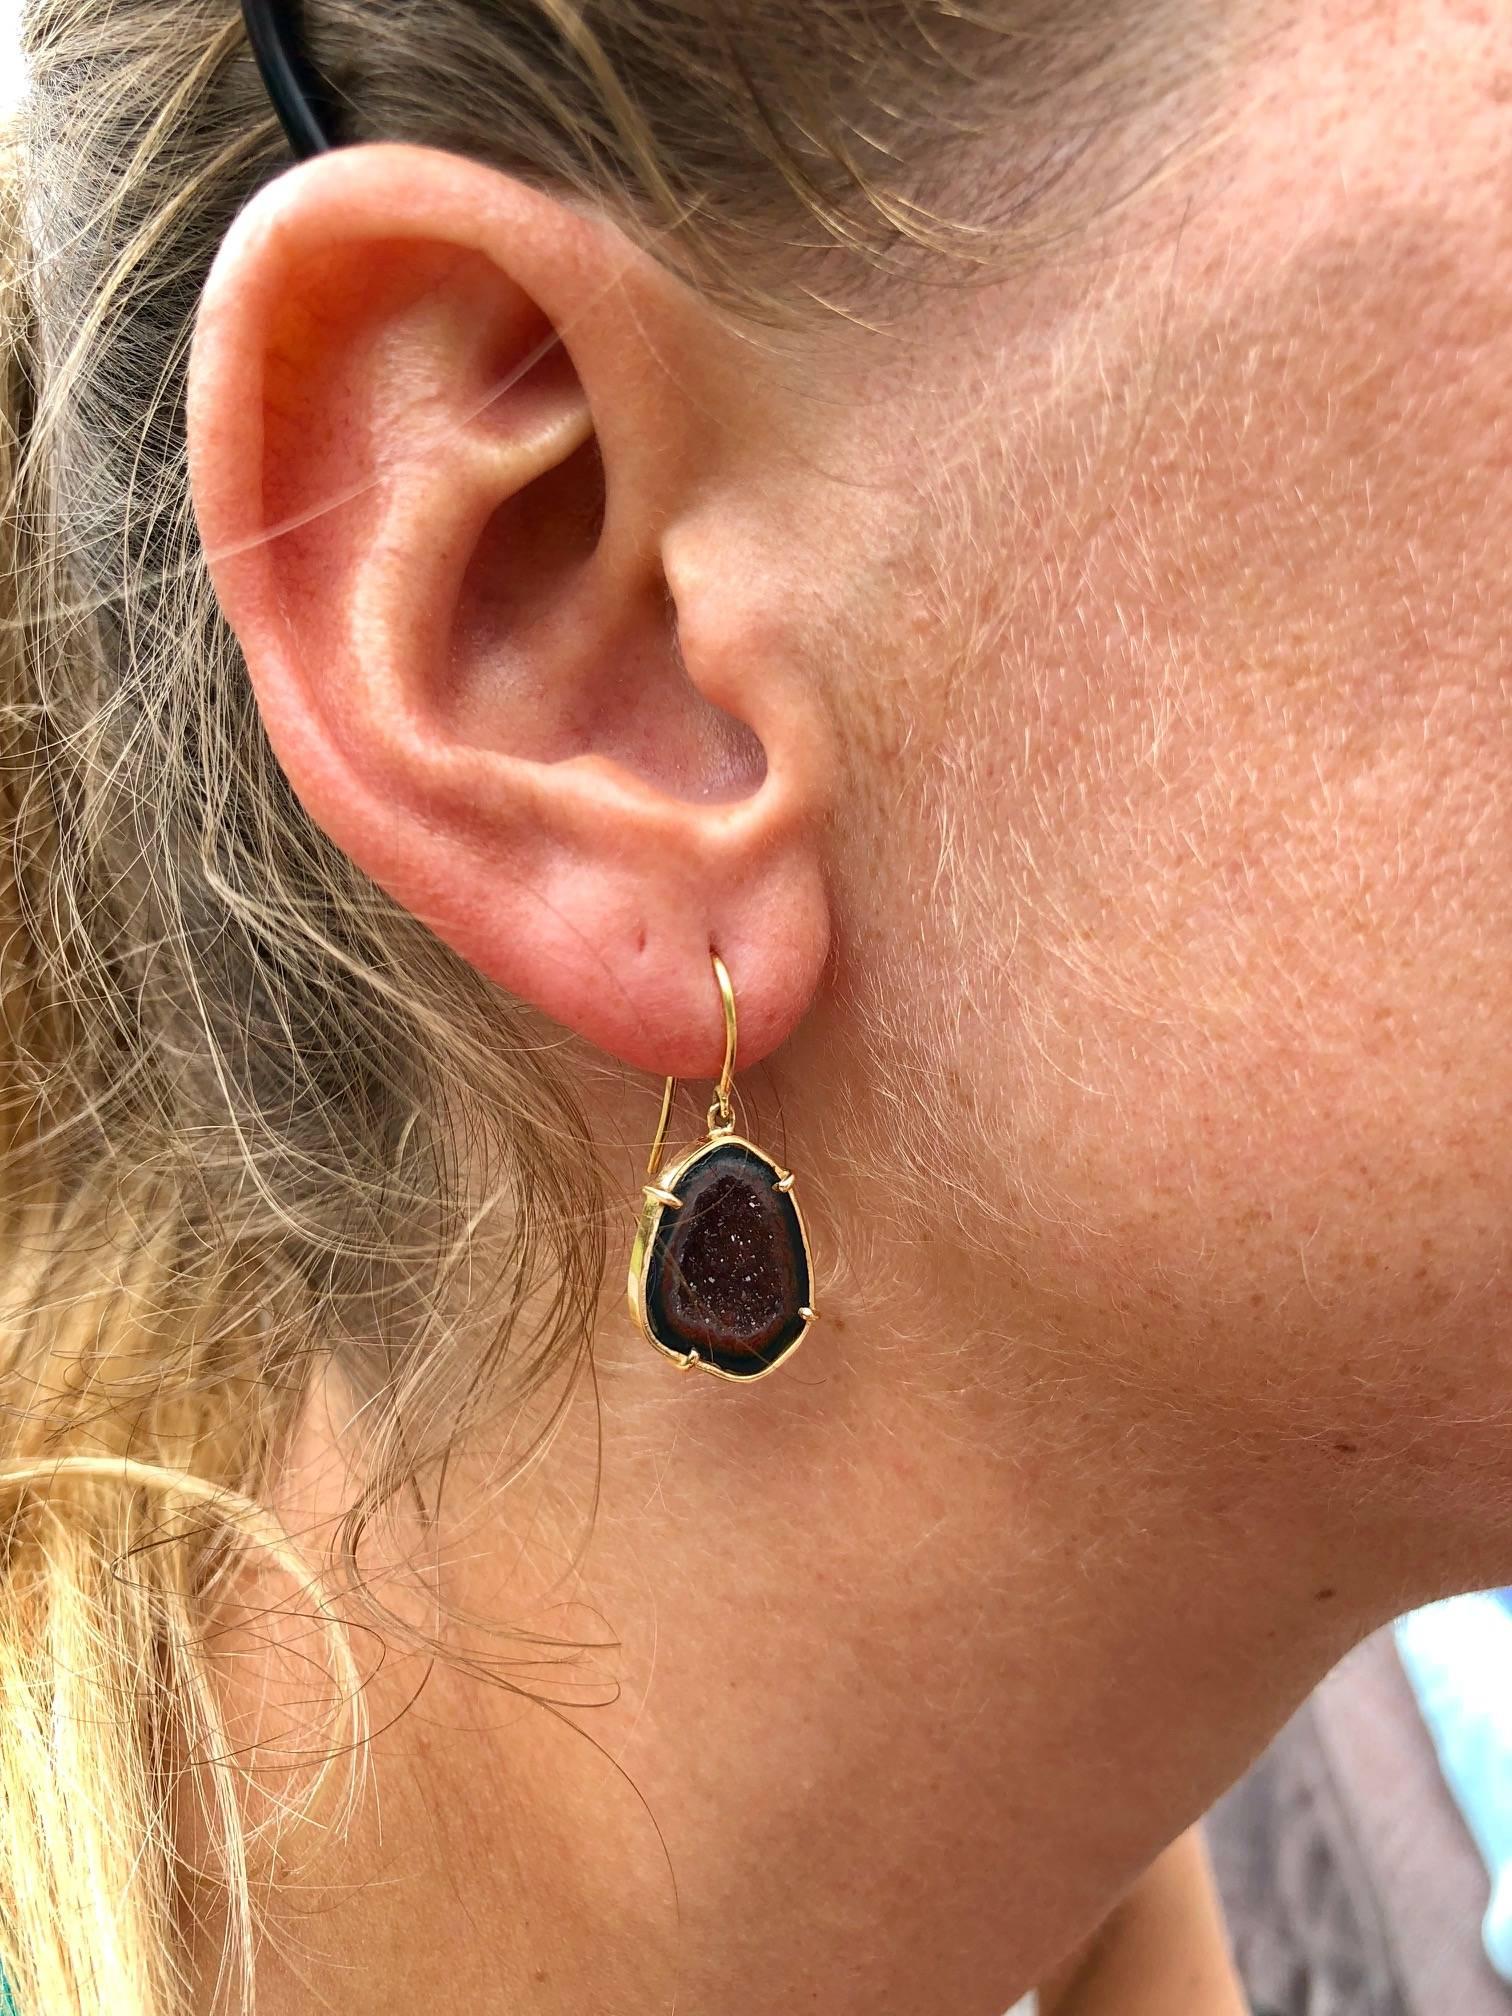 Karolin's 'Dylan' earrings are handcrafted from 18 K rose gold.
These earrings are simple but oh so beautiful.
The color bordeaux is amazing for Summer and Winter.